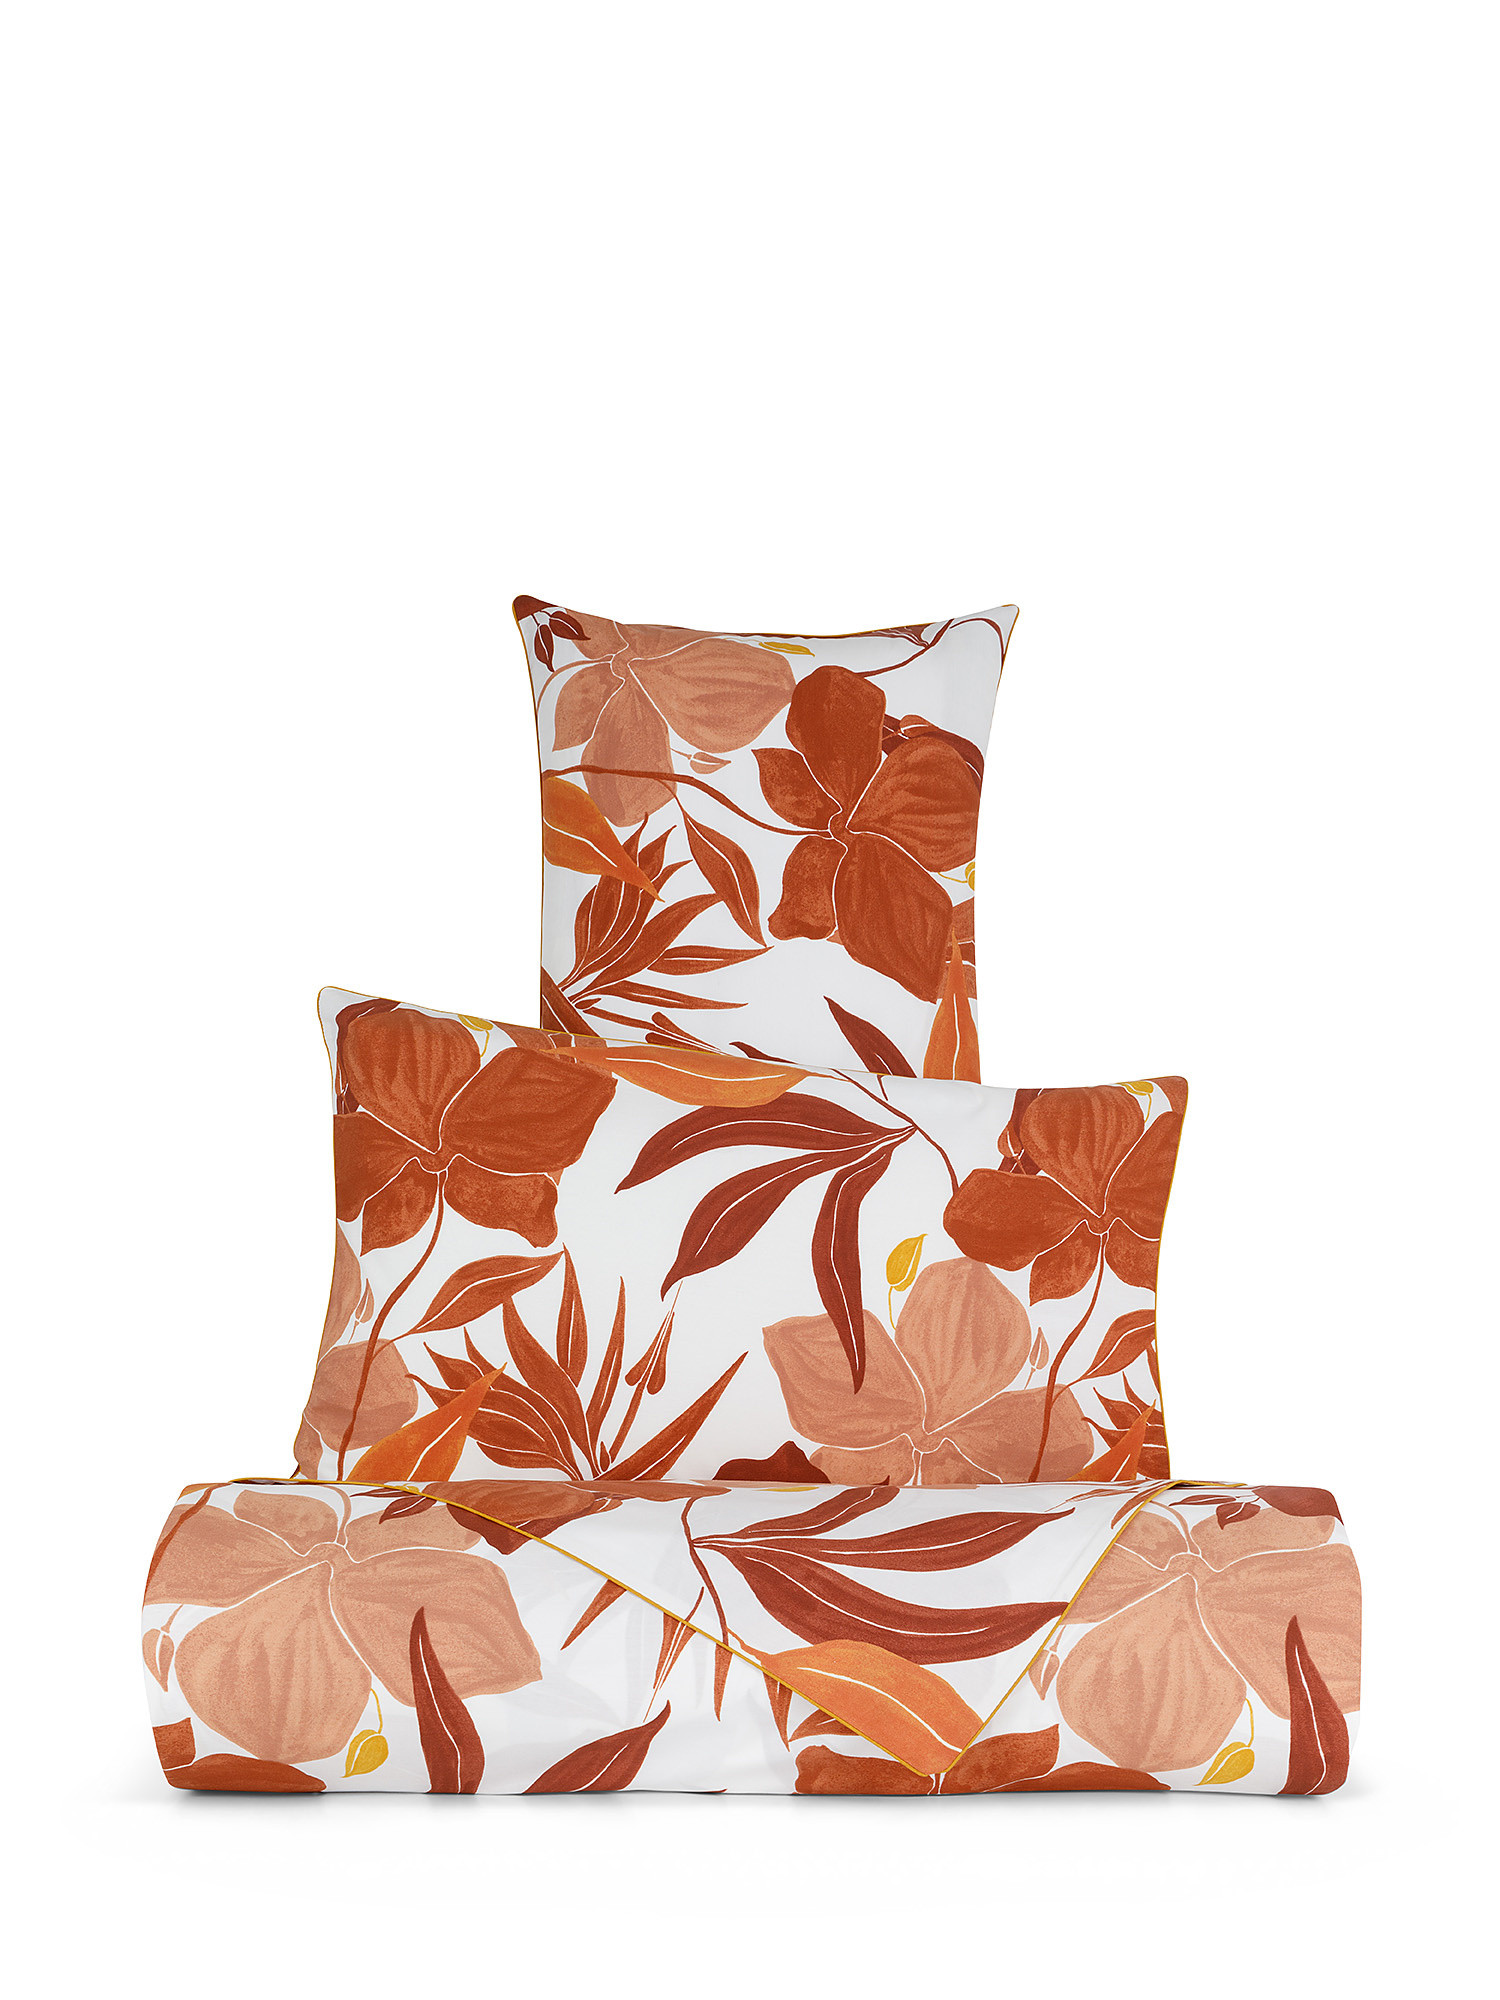 Floral patterned percale cotton pillowcase, Brown, large image number 1